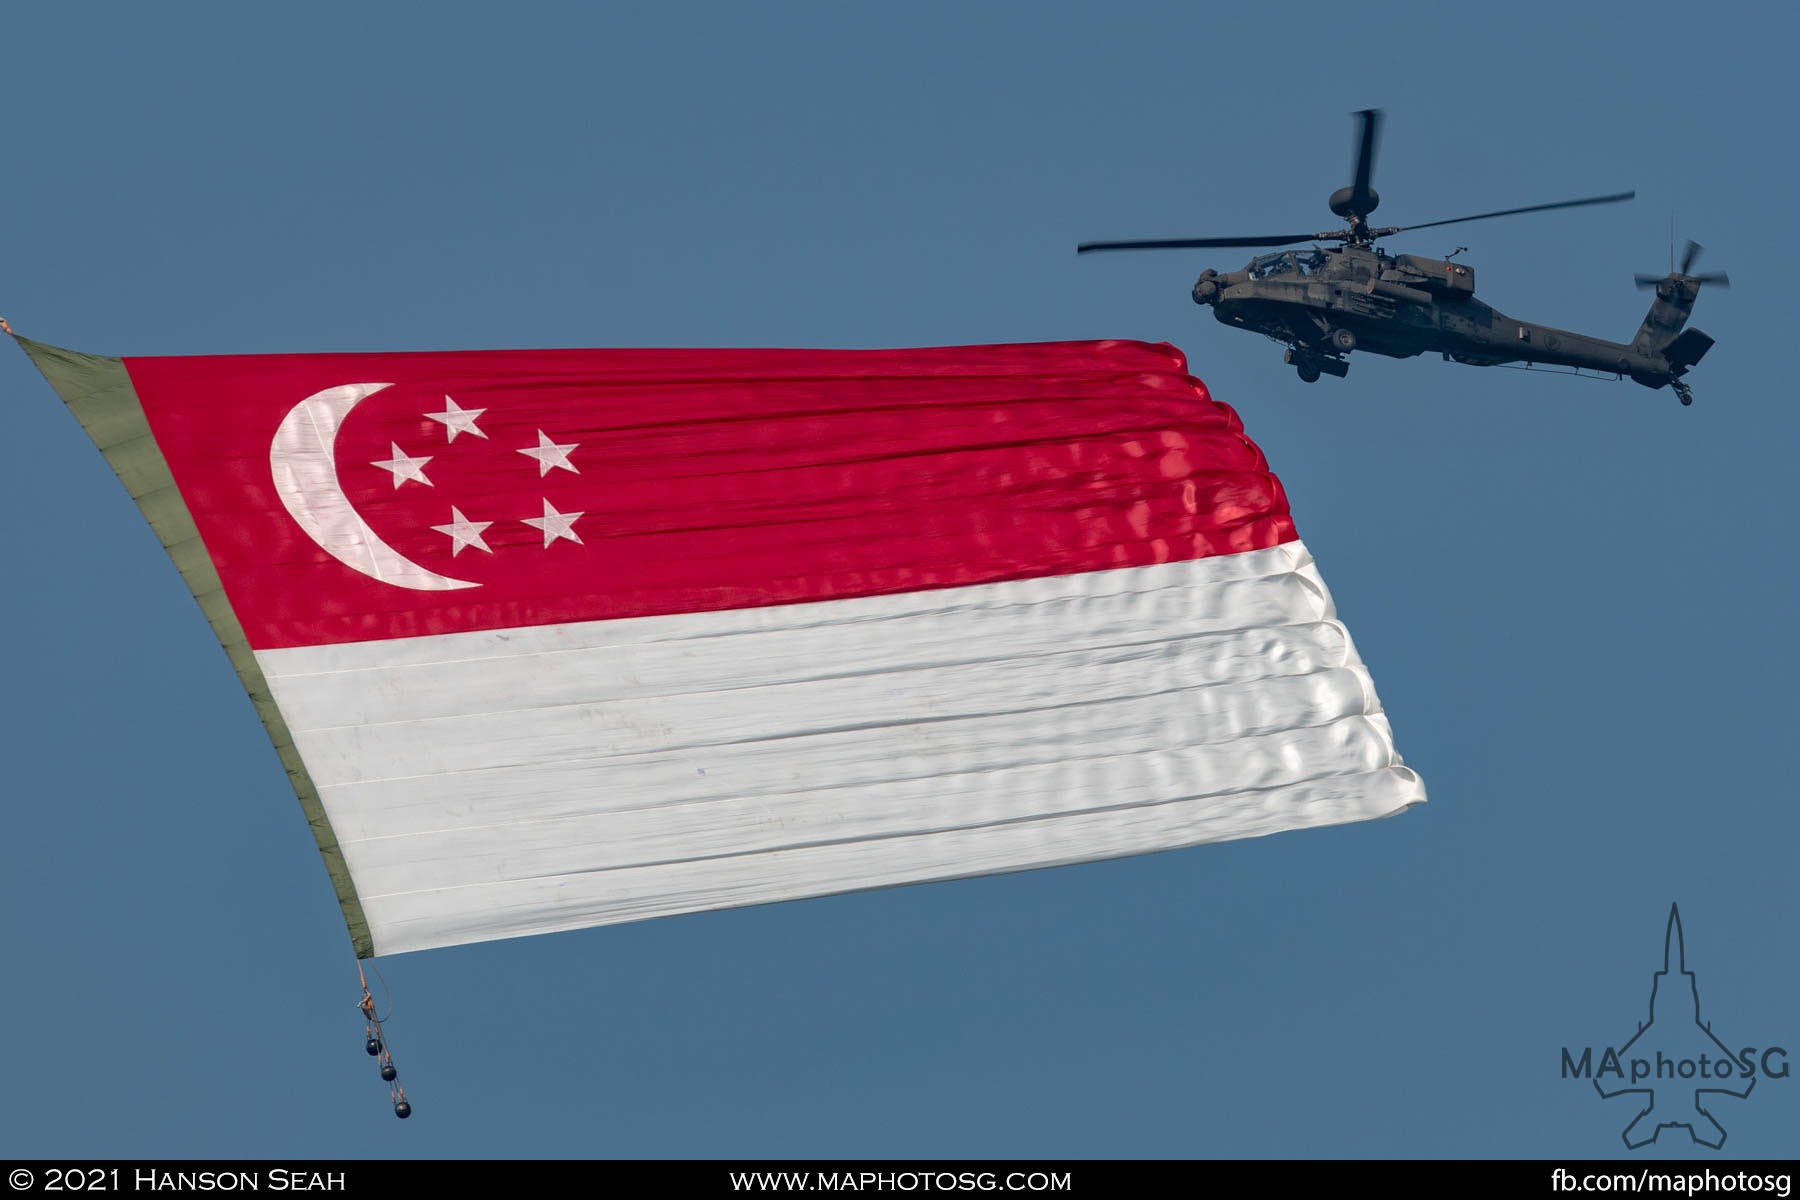 The Singapore Flag flies as the escorting Apache looks on